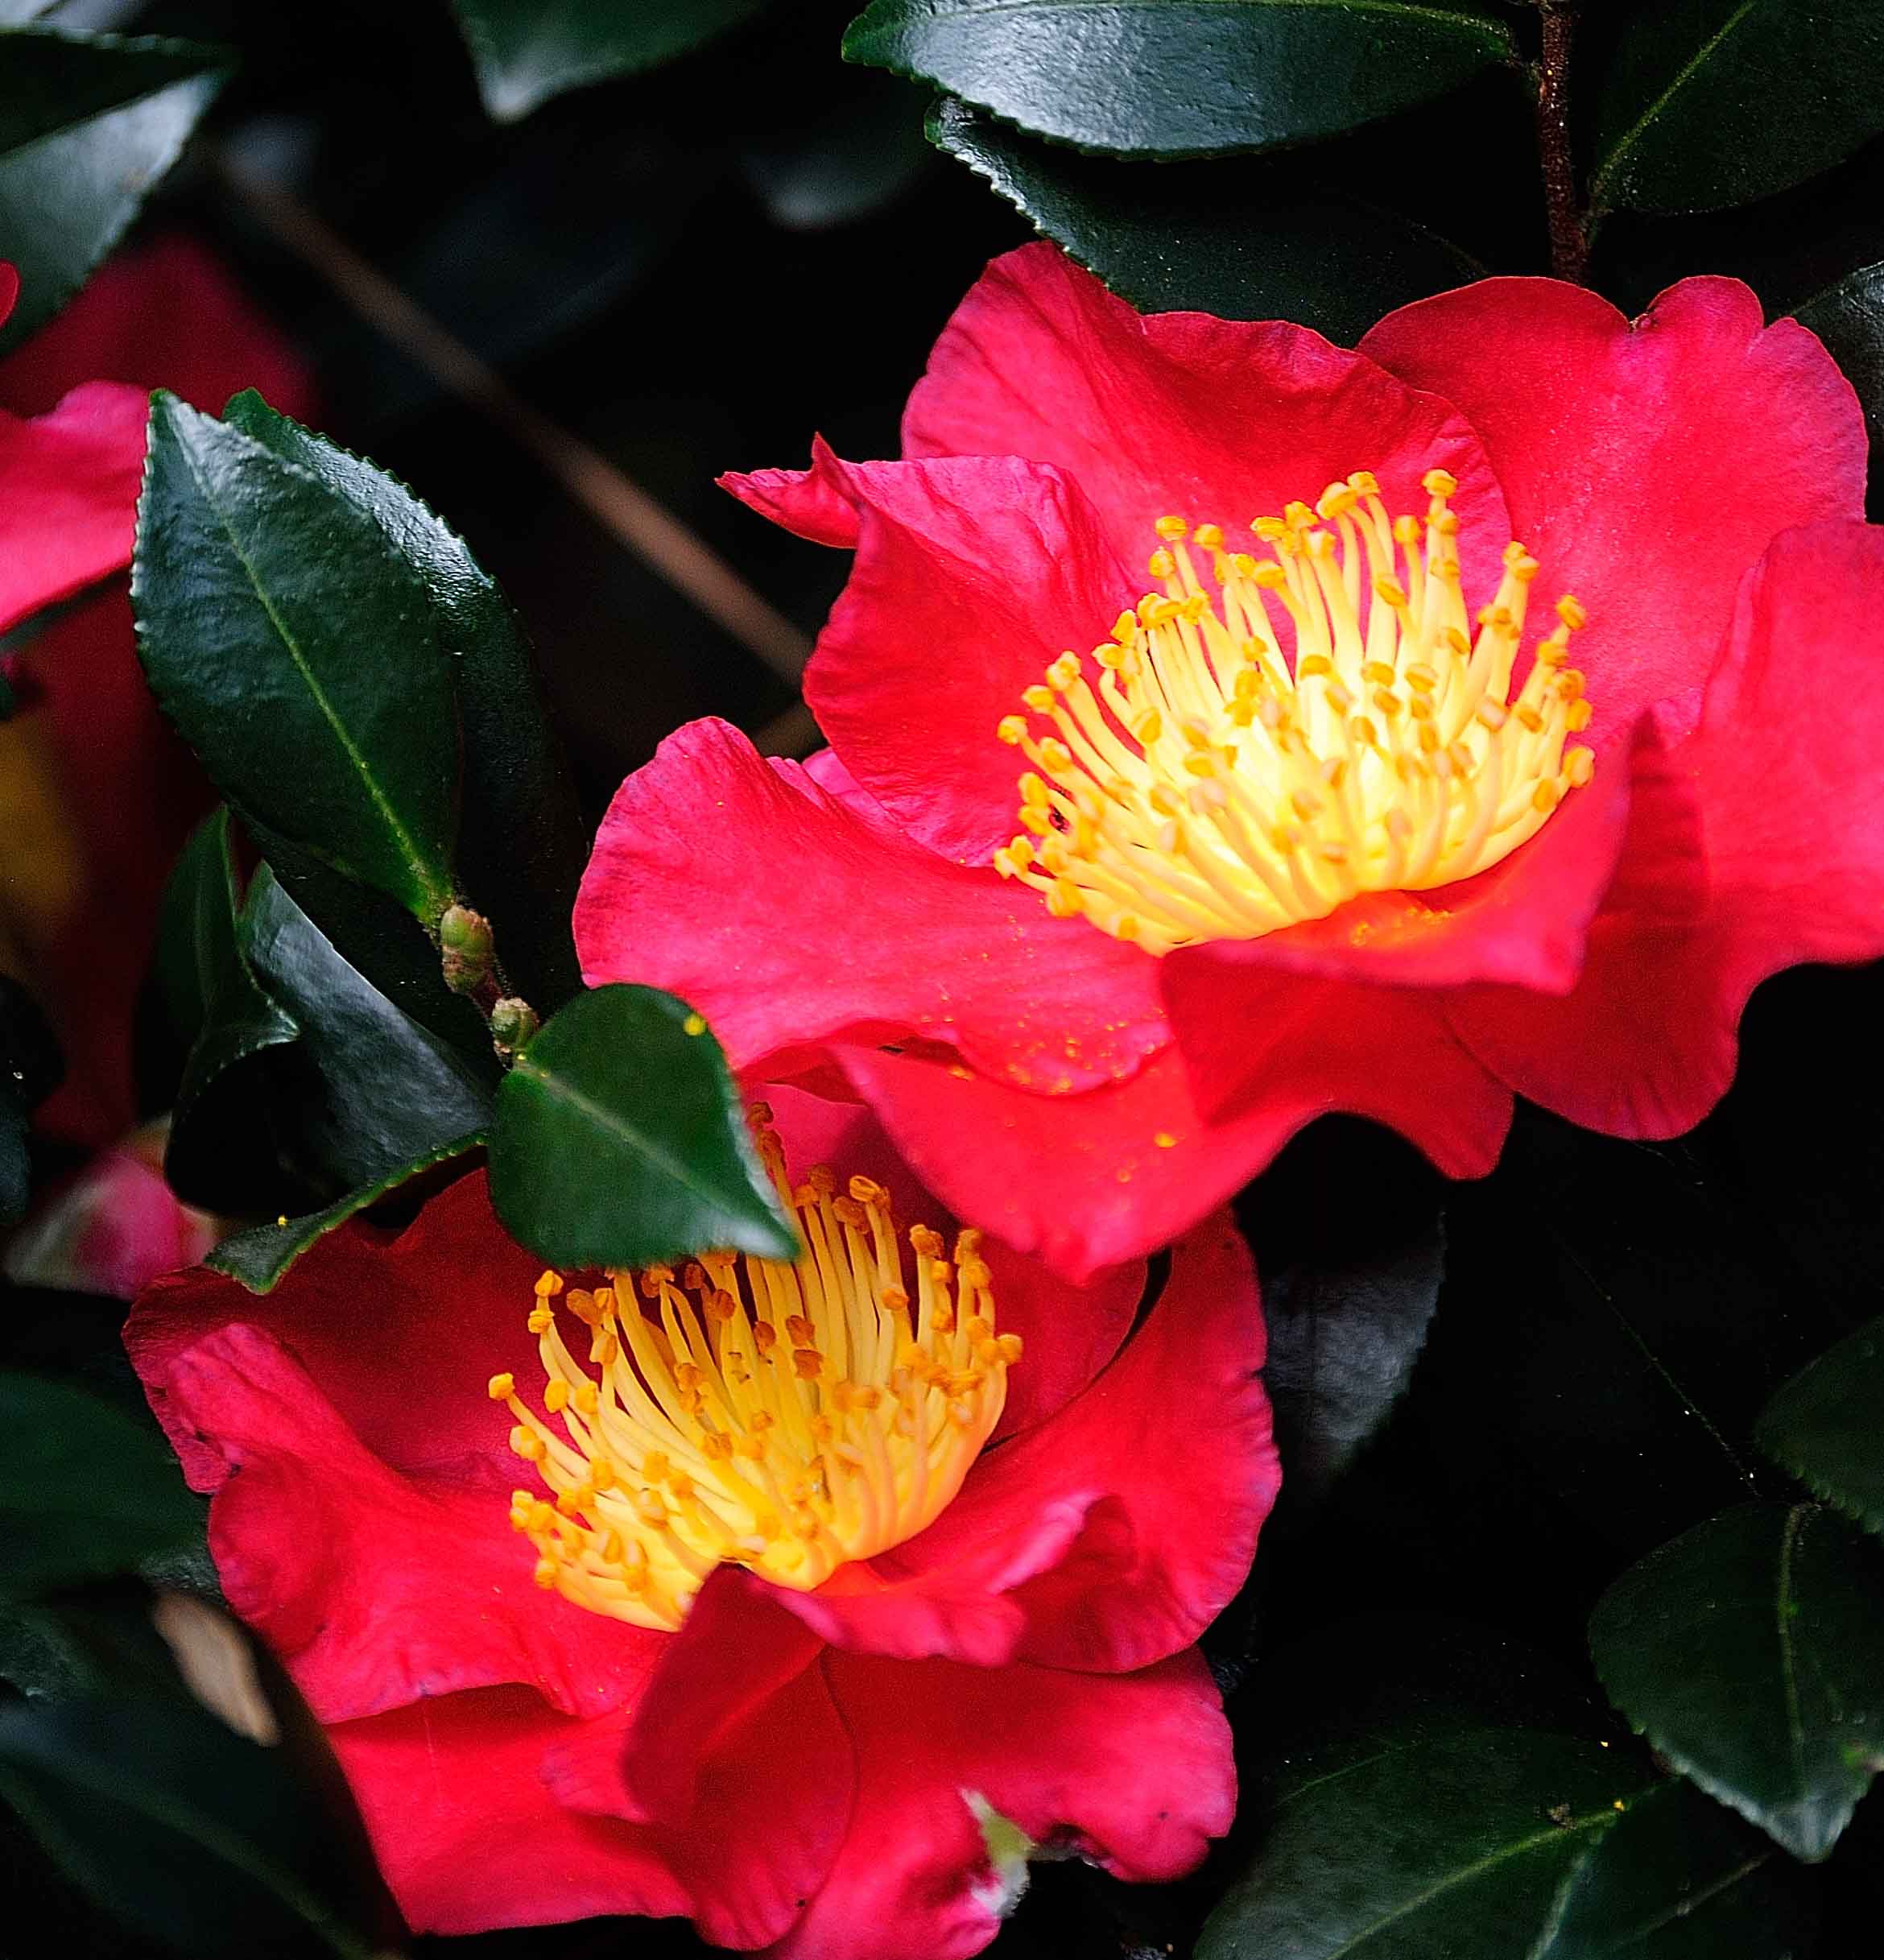 Yuletide Camellias bloomed early this year.